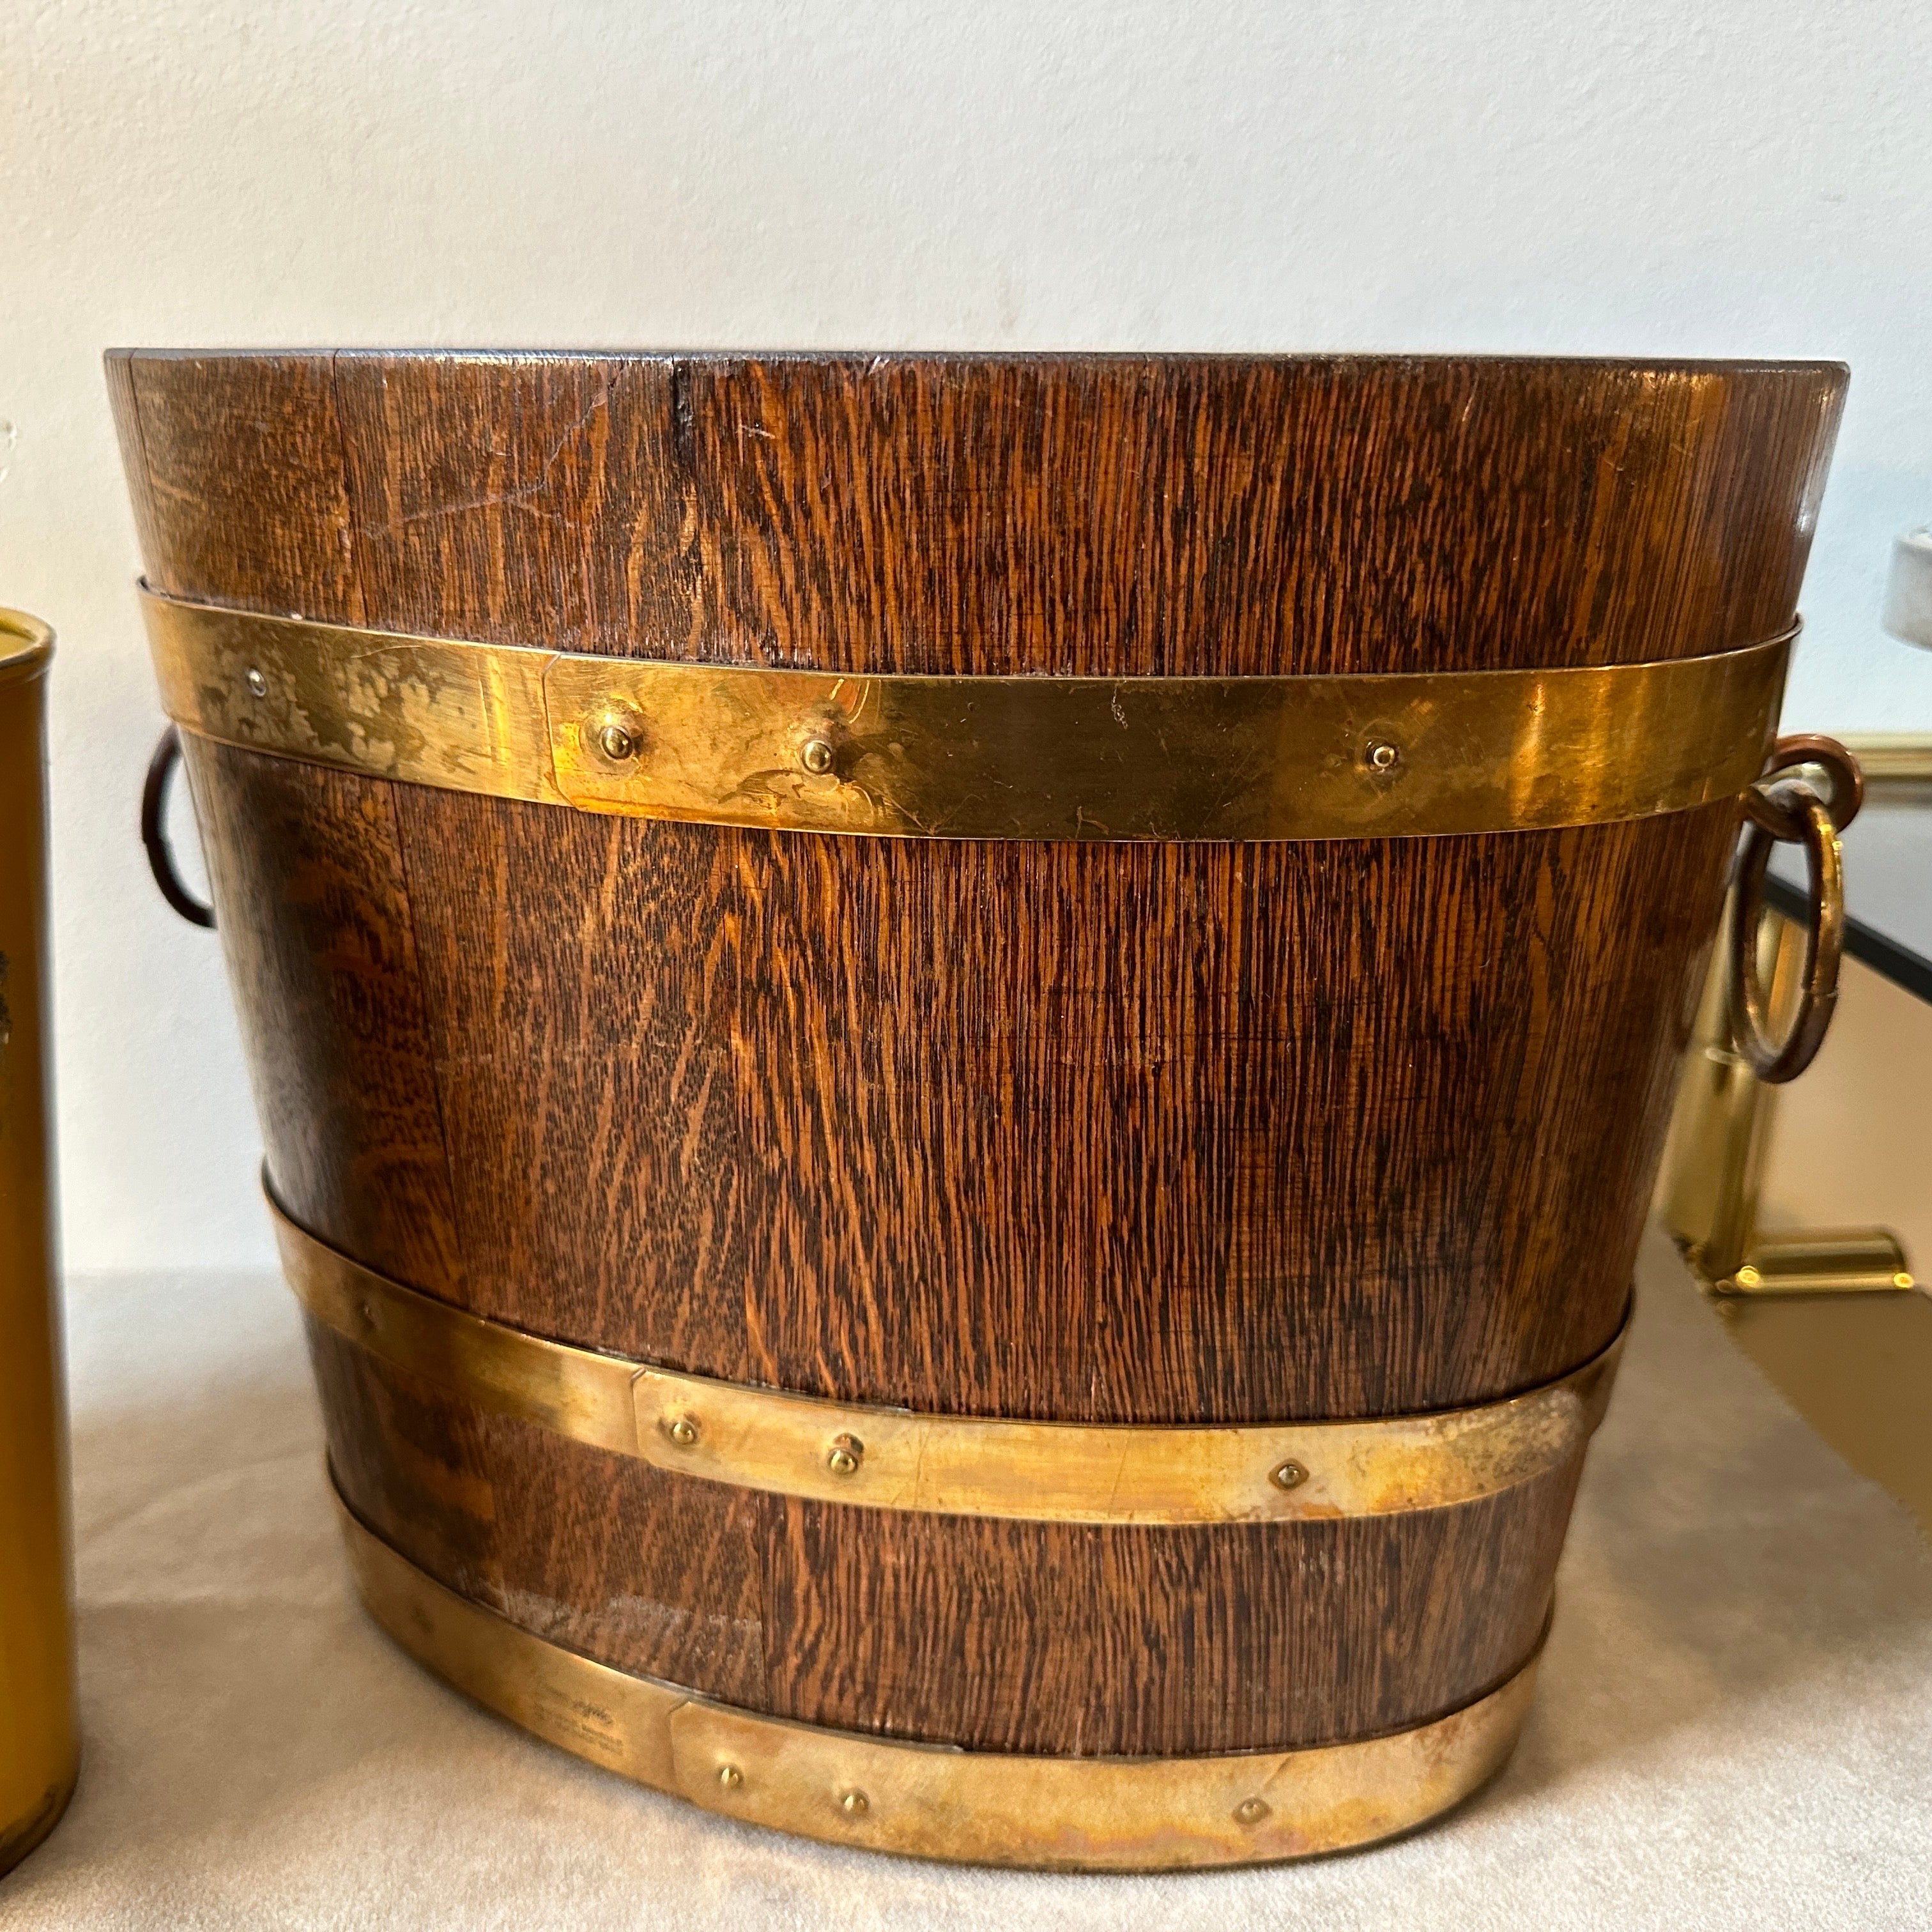 A superb oak and brass wine cooler designed and manufactured in France in the Thirties By Geraud Lafitte. It's in original condition and patina, marked on a side Geraud Lafitte meilleur ouvrier de France 1933. The wine cooler can be used for two